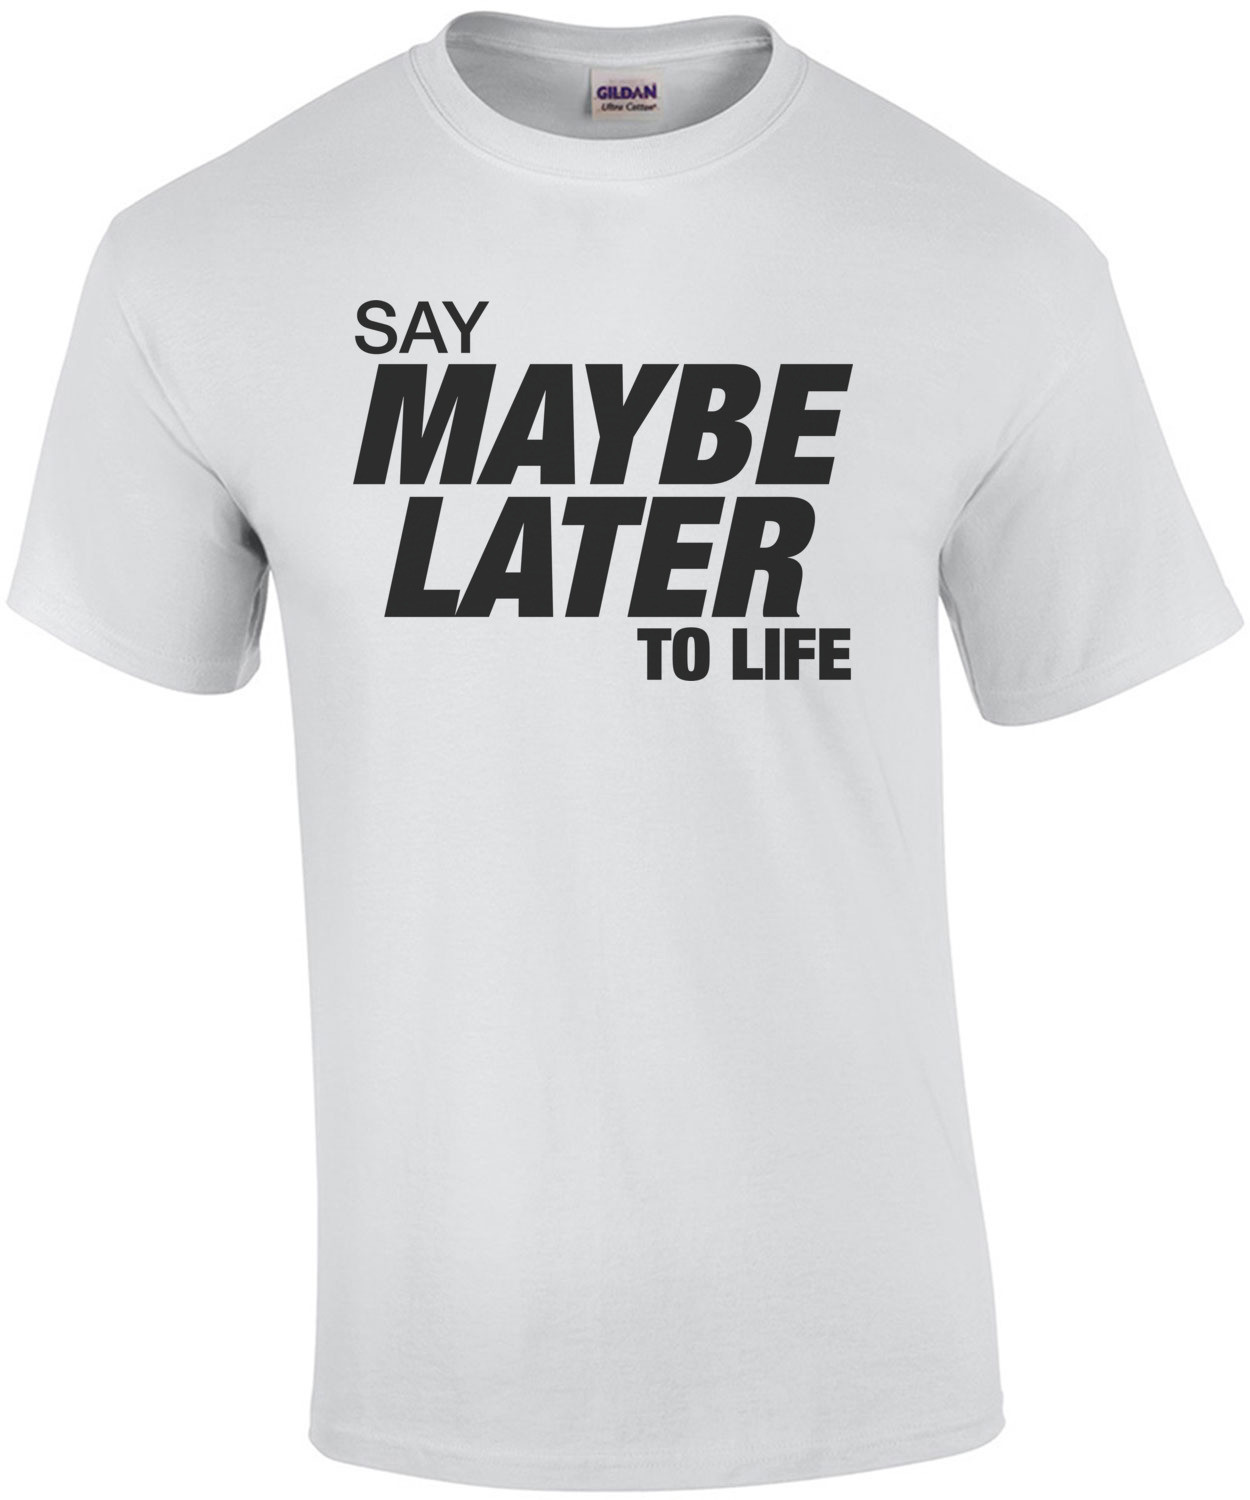 Say Maybe Later To Life Shirt